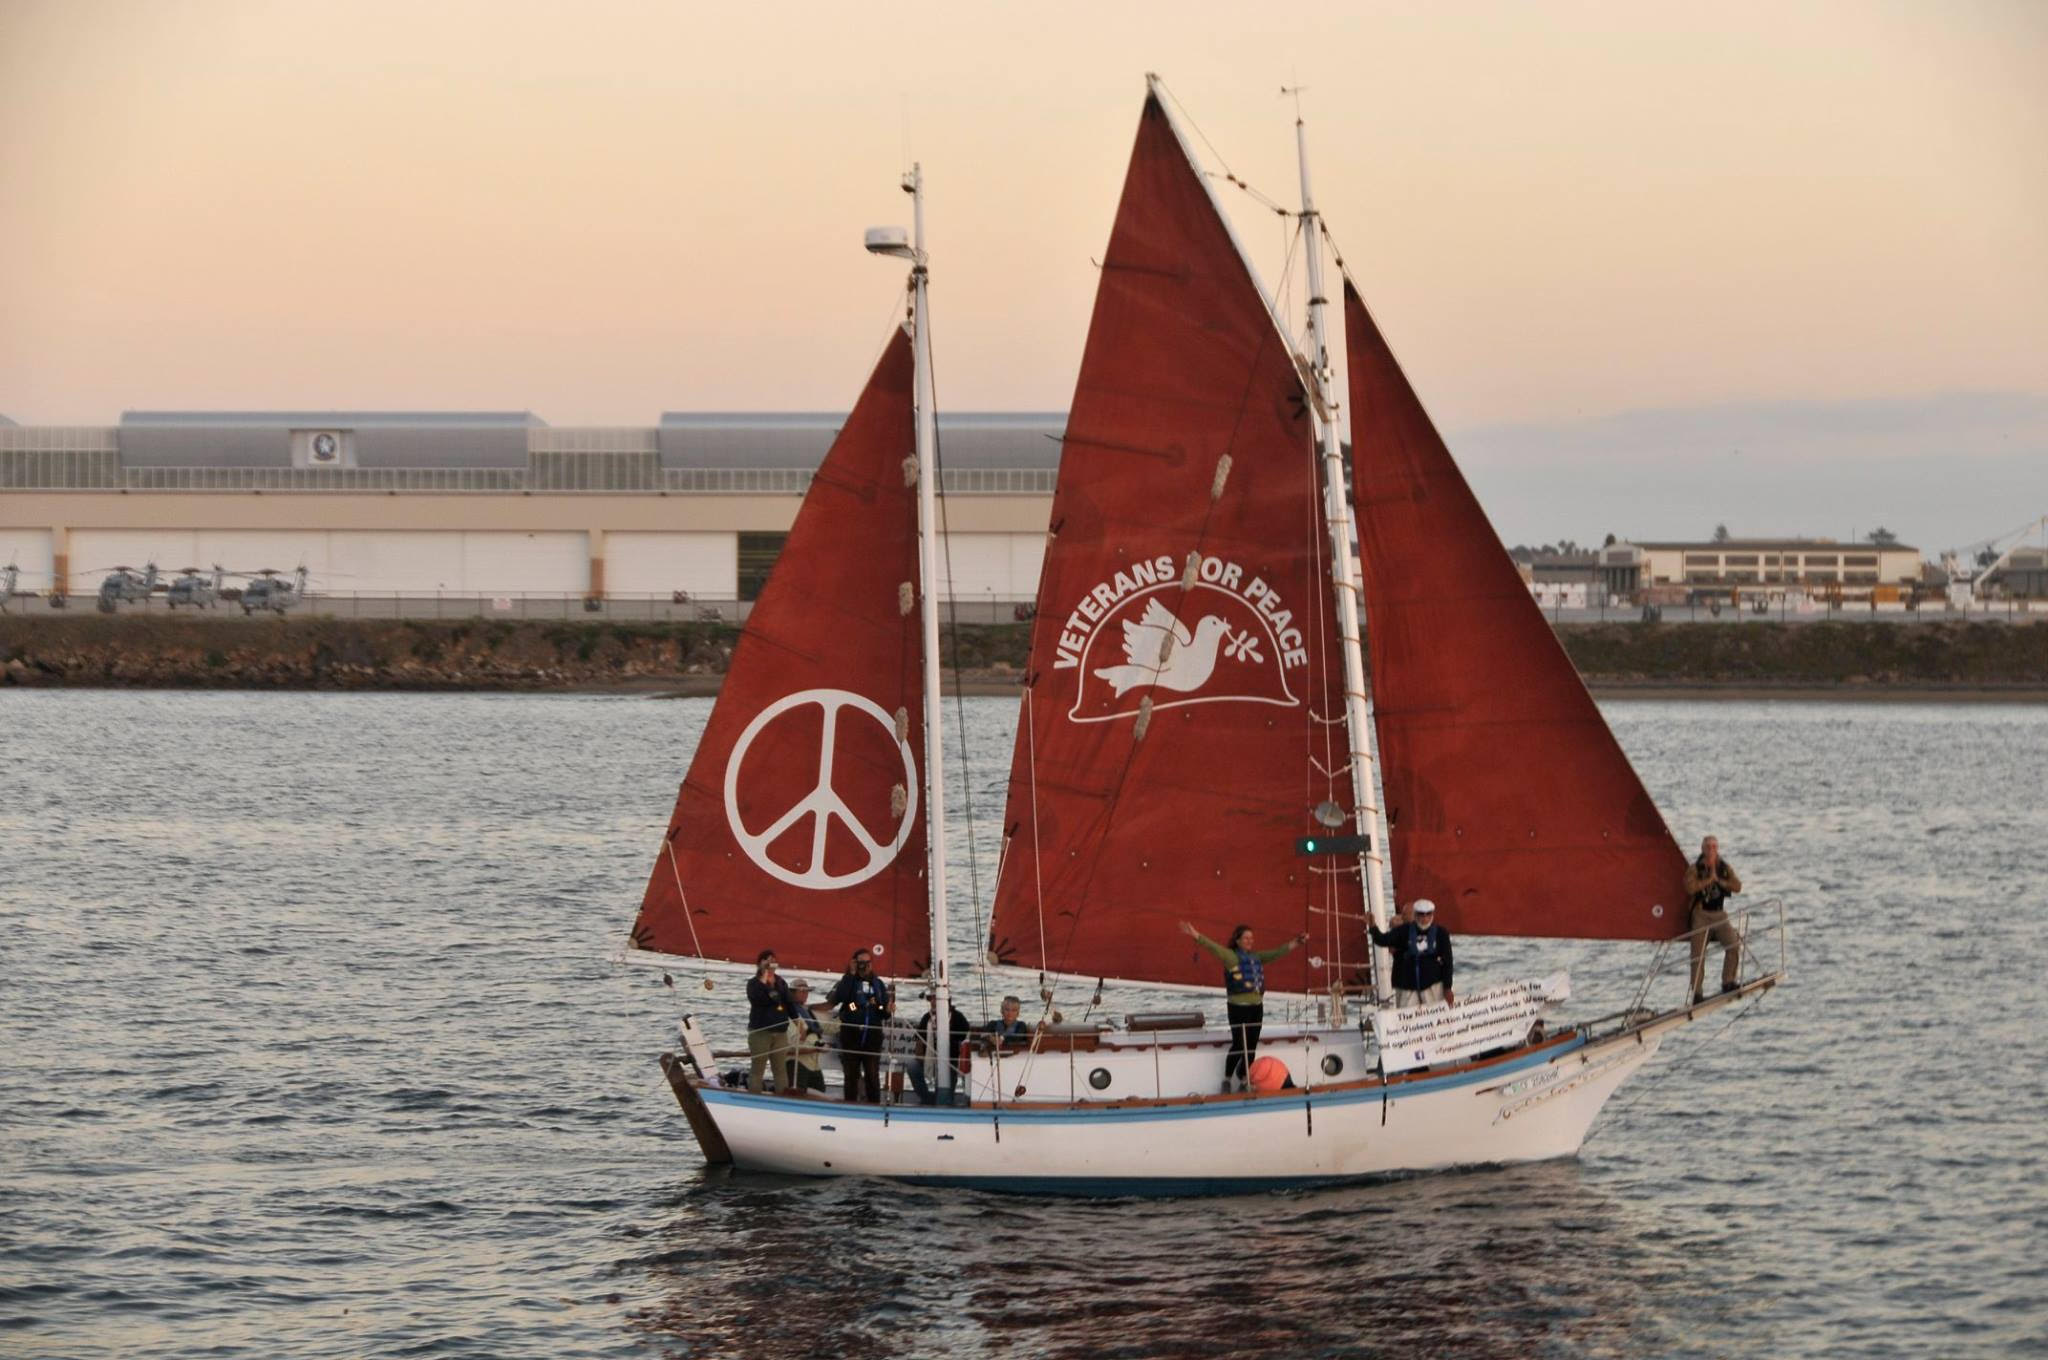 picture of the peace boat "Golden Rule," with the Veterans for Peace logo on its sails